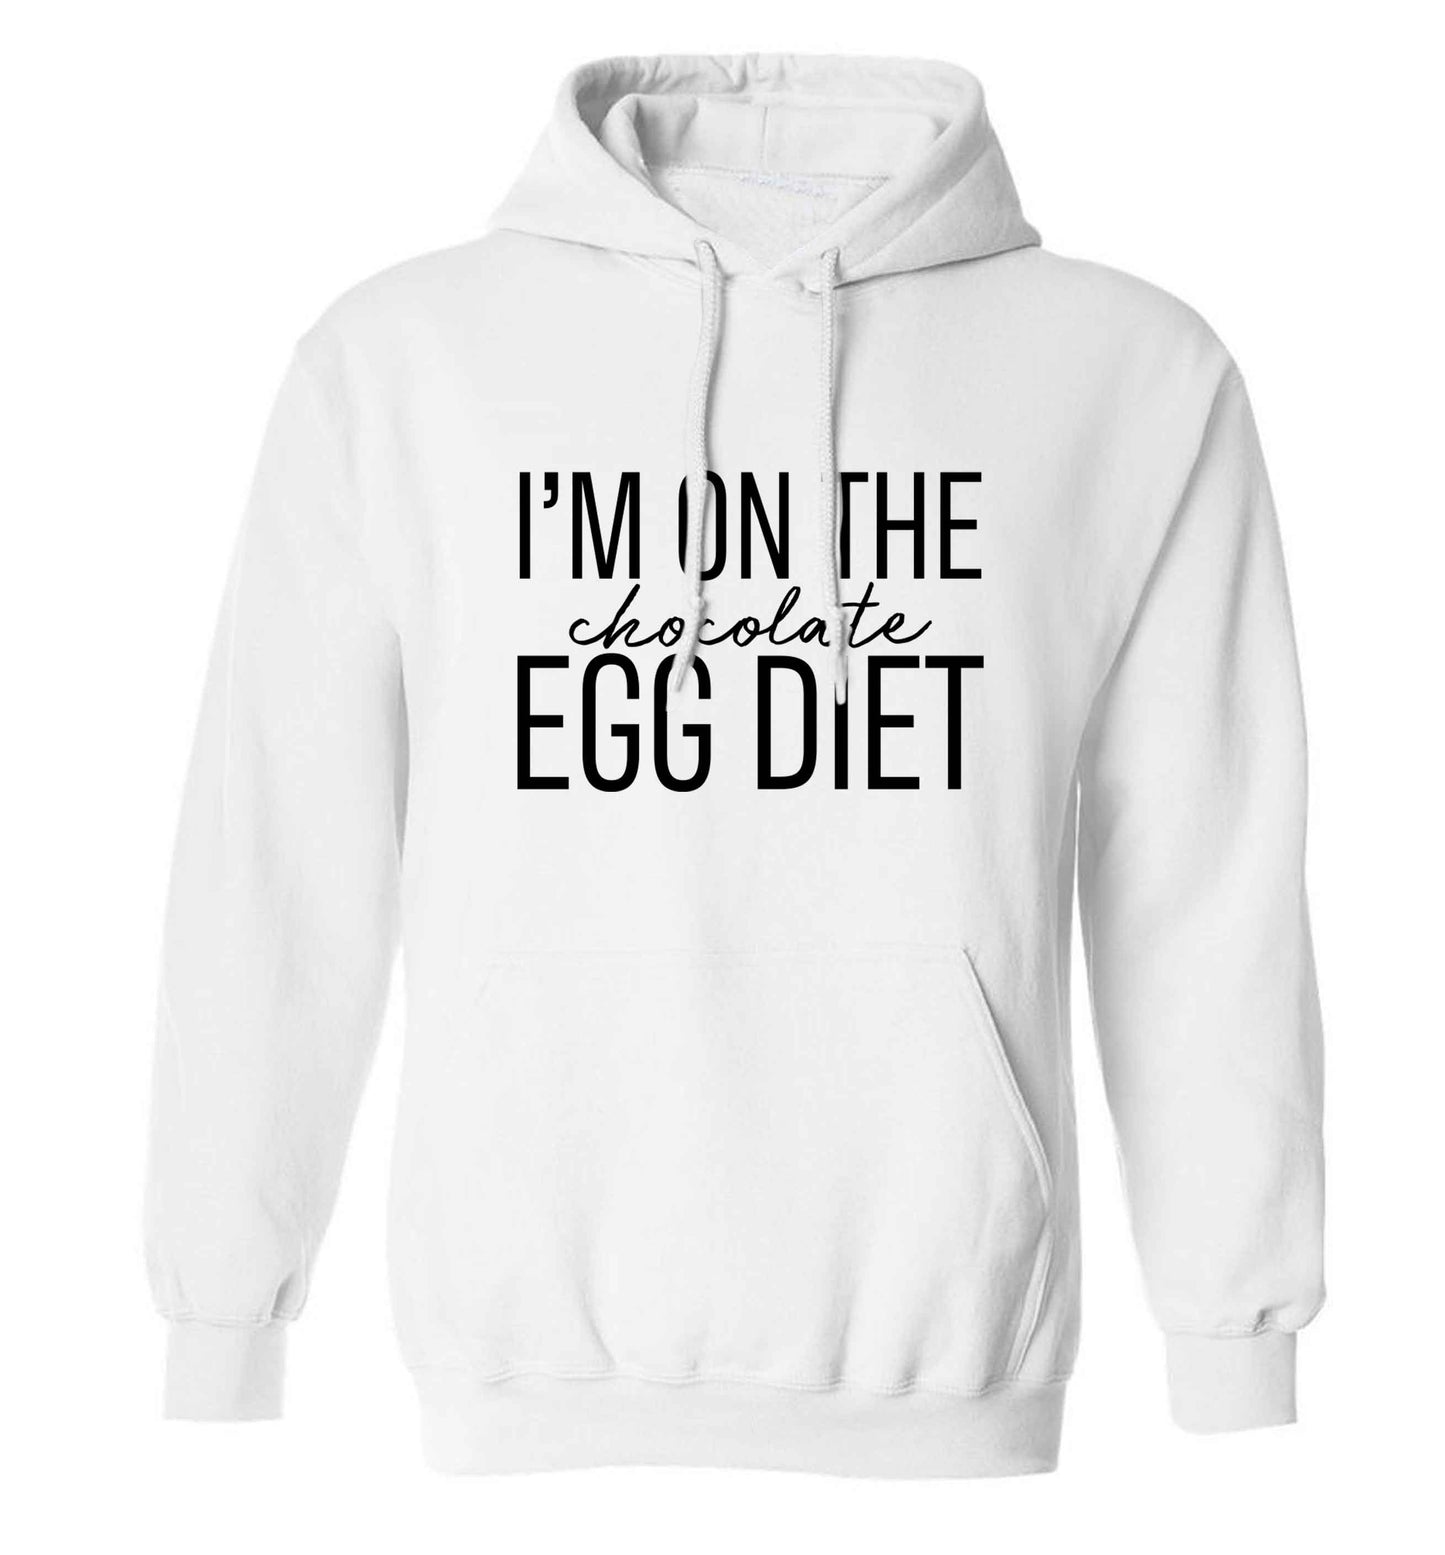 I'm on the chocolate egg diet adults unisex white hoodie 2XL